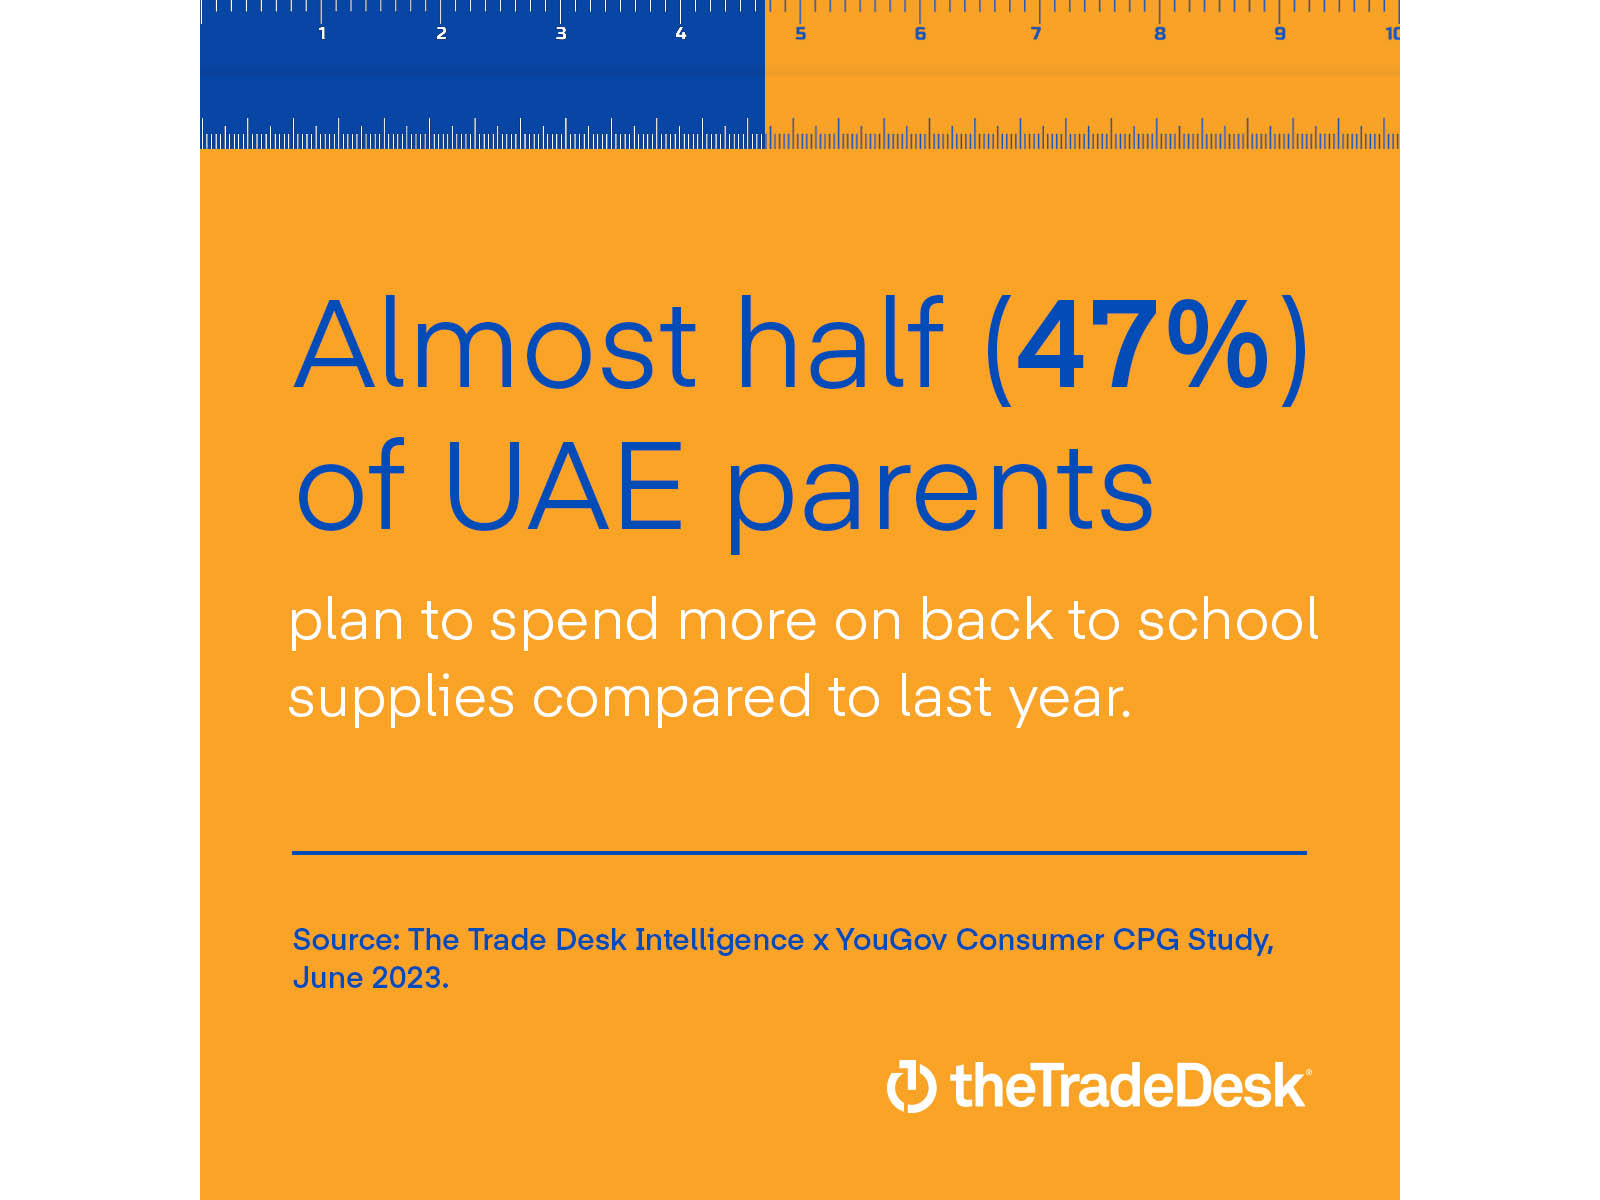 Data-driven advertising key to reaching back-to-school shoppers in the UAE